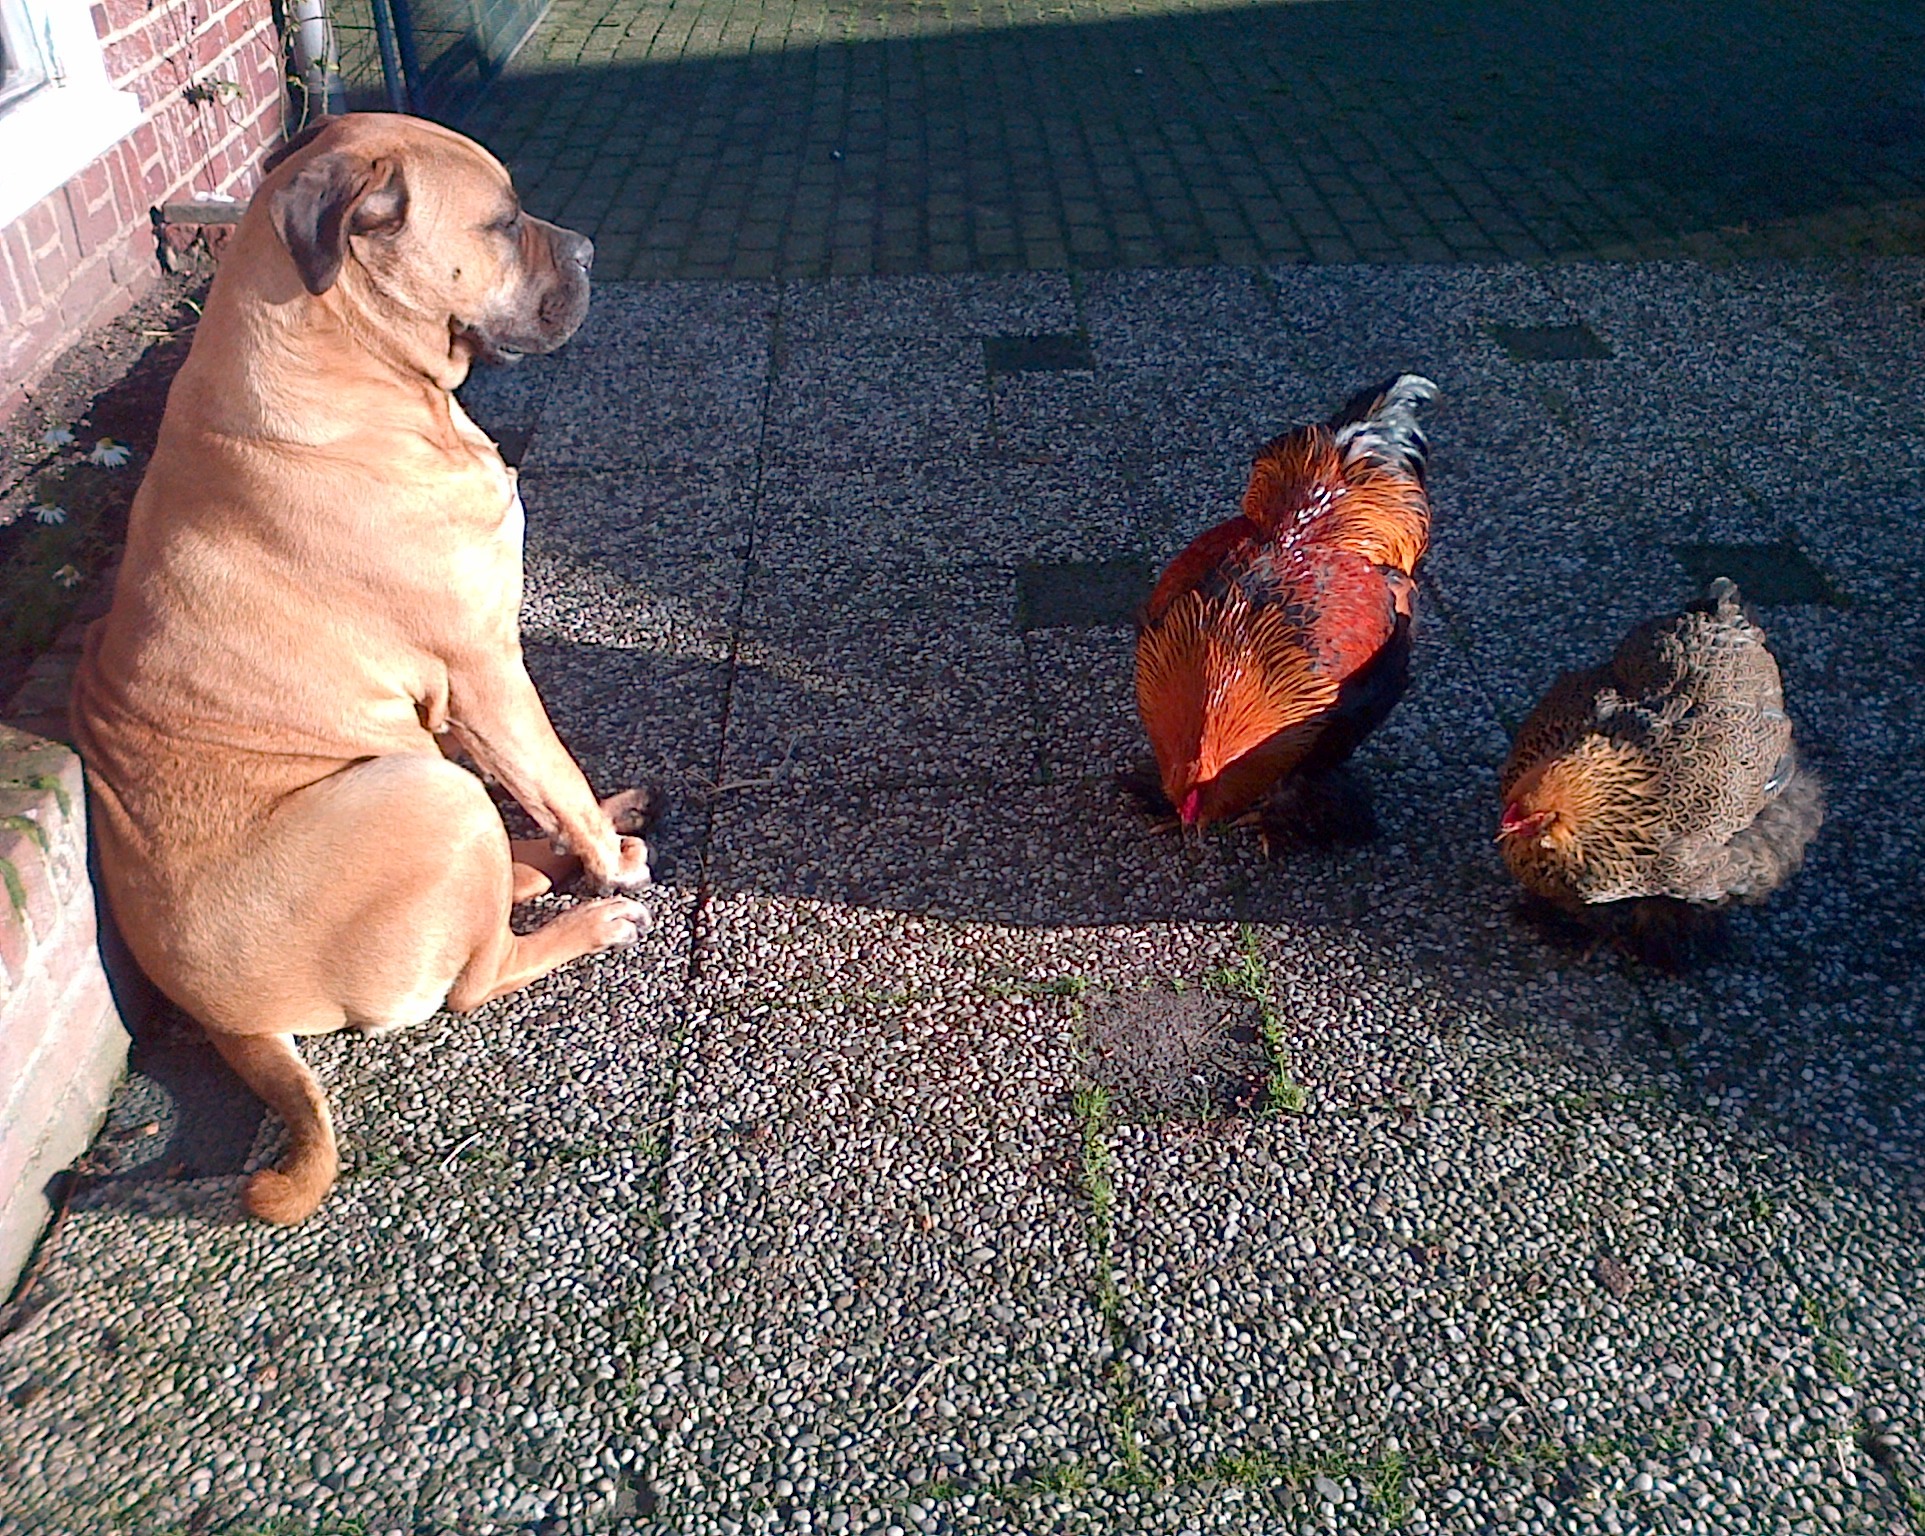 The chickens bodyguard!